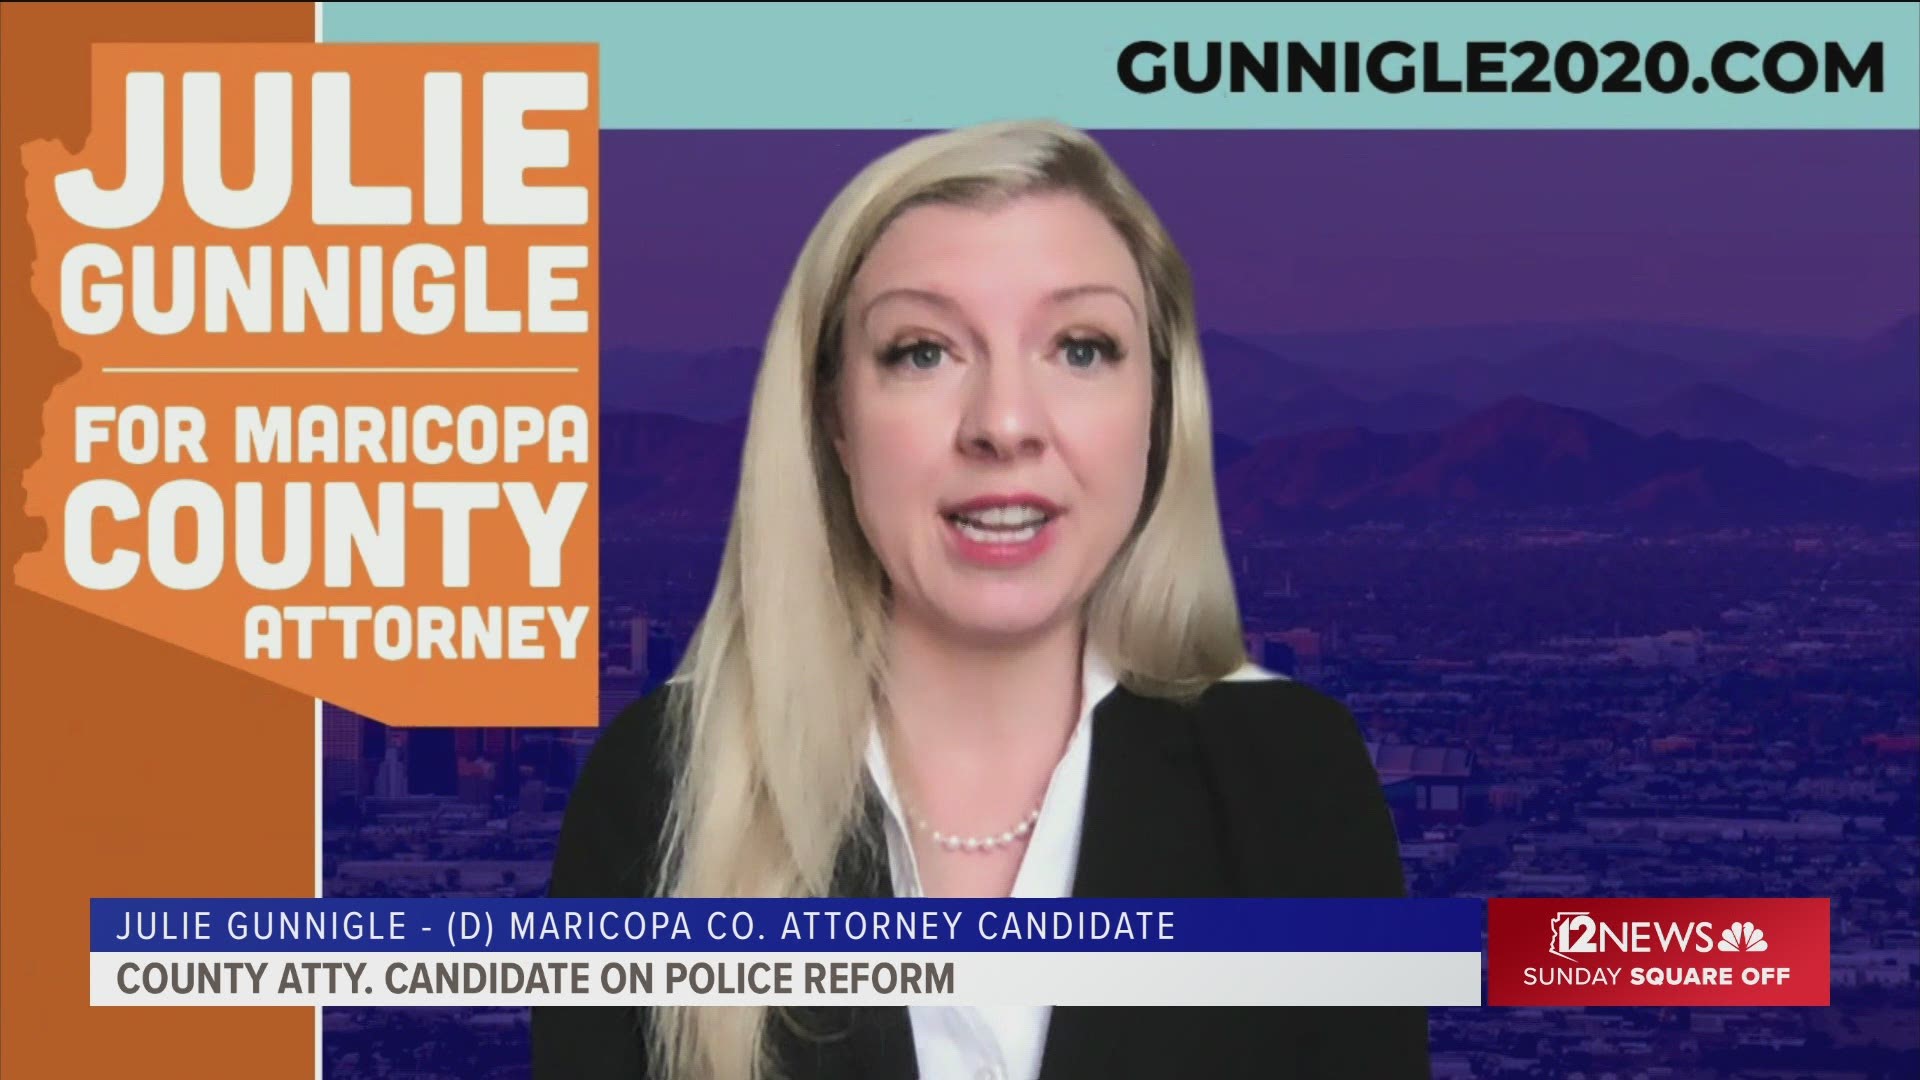 The race for Maricopa County attorney is playing out amid nationwide calls for criminal justice reform and demands for reforming our police departments.